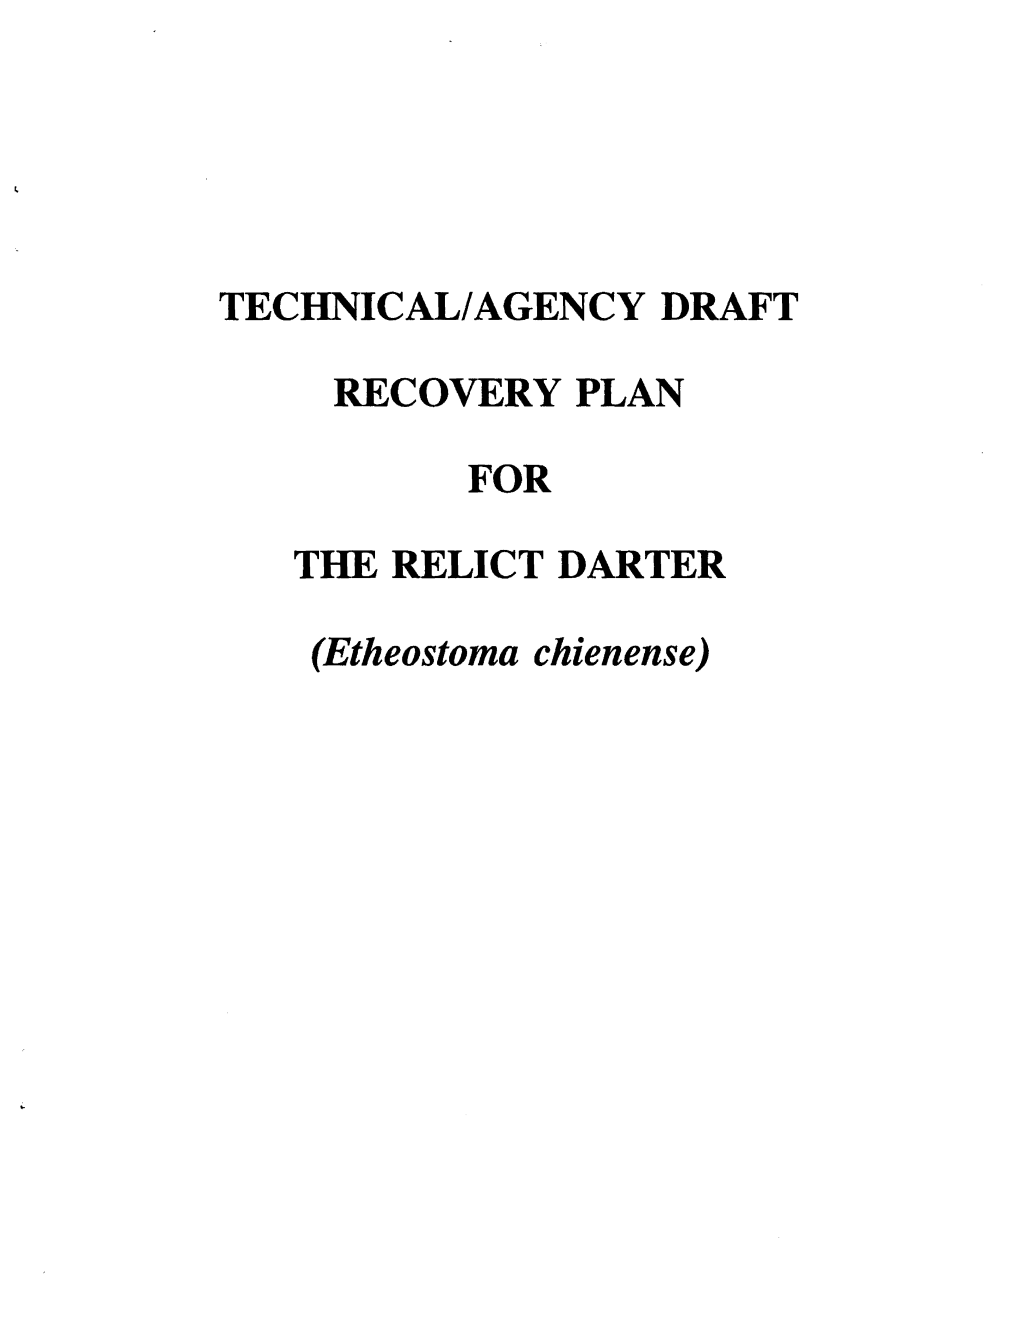 (Etheostoma Chienense) TECHNICAL/AGENCY DRAFT RECOVERY PLAN